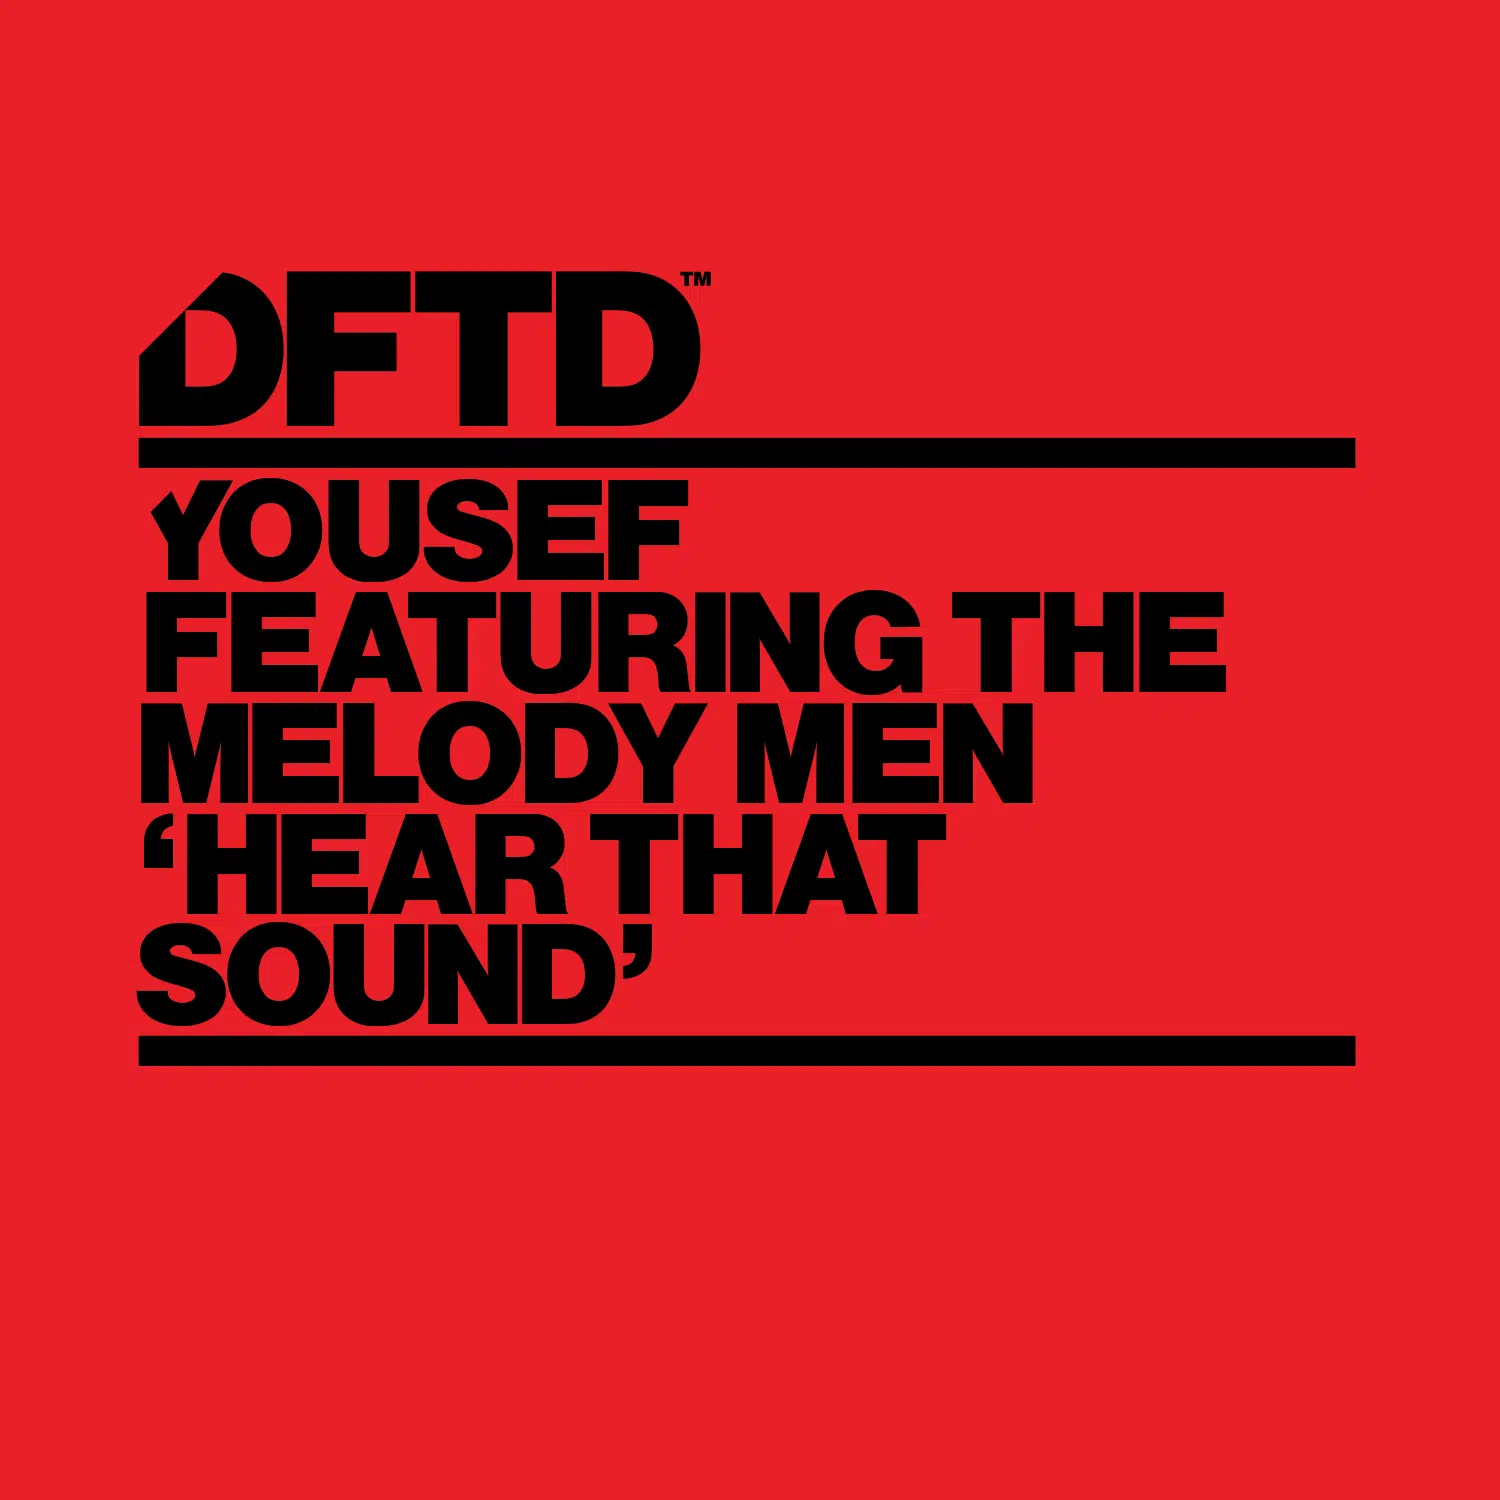 Yousef ft The Melody Men “Hear That Sound”